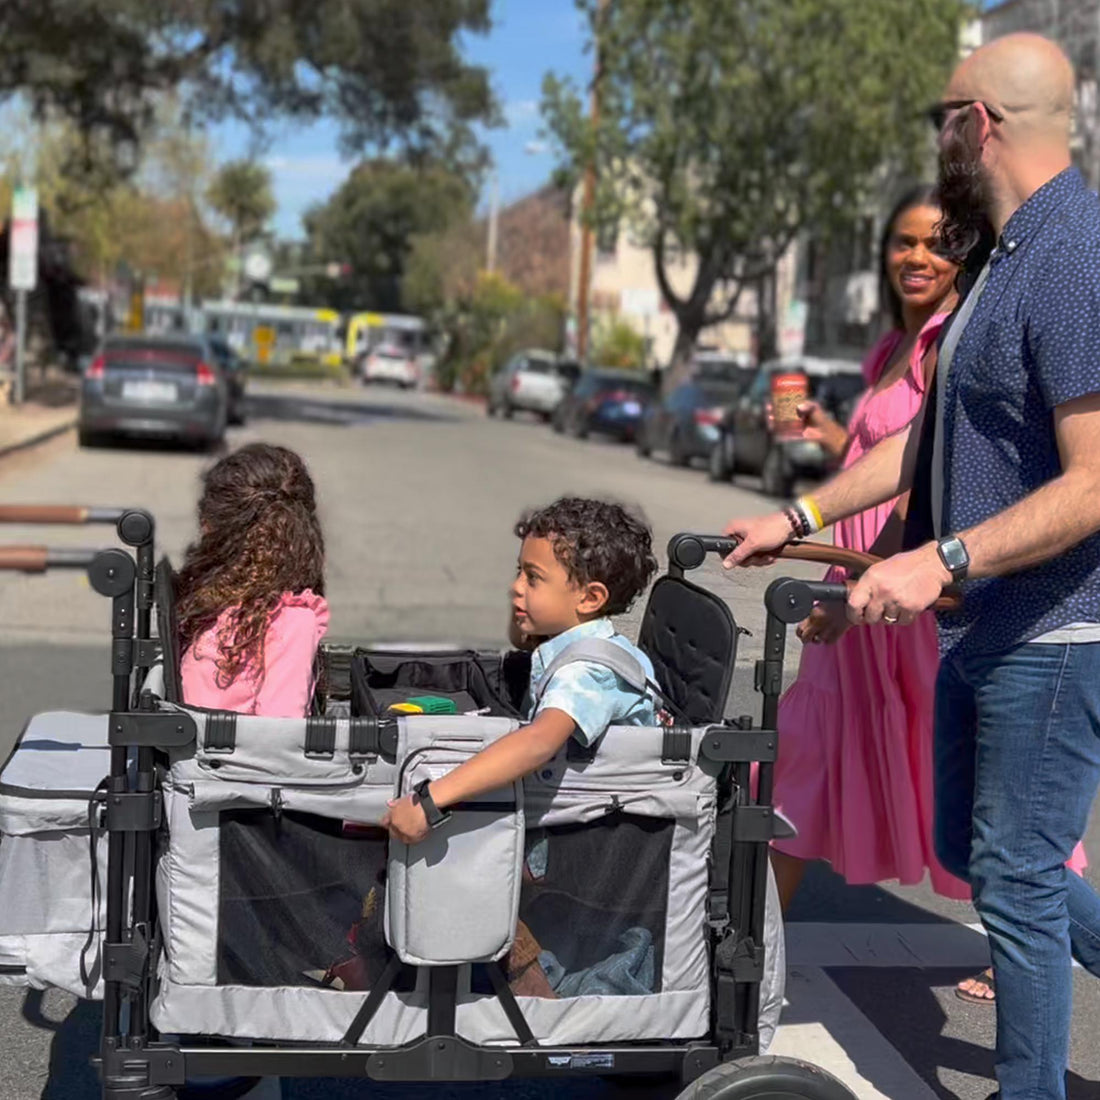 The Top Features of the Keenz Wagon Stroller You Need to Know About